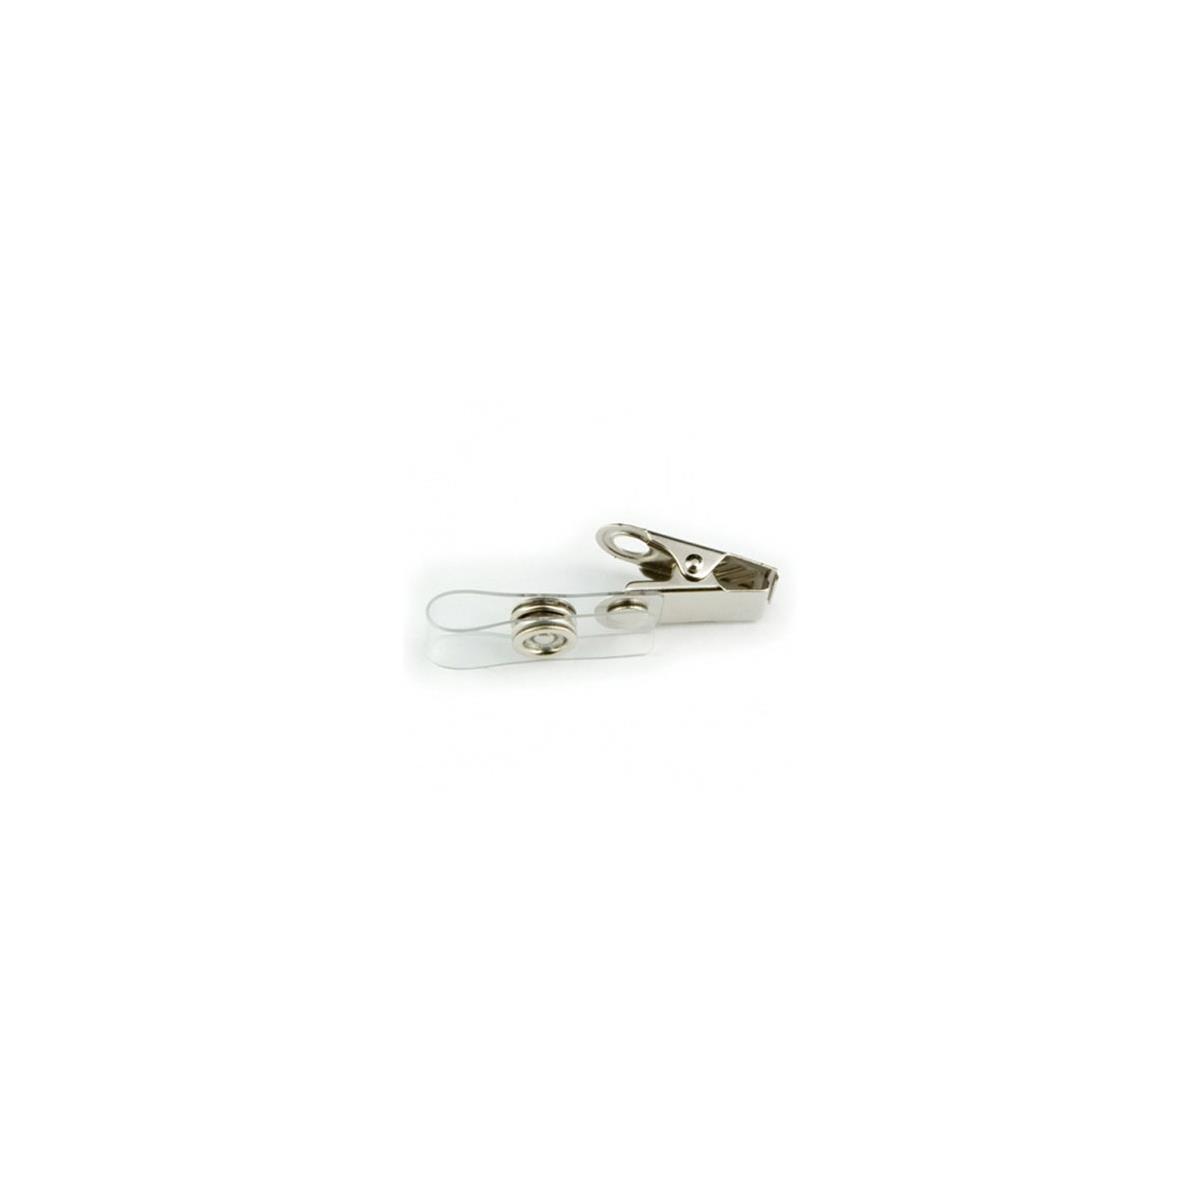 Image of Lectrosonics 35690 Strain Relief Clip-On for Lavaliere Mic Cords